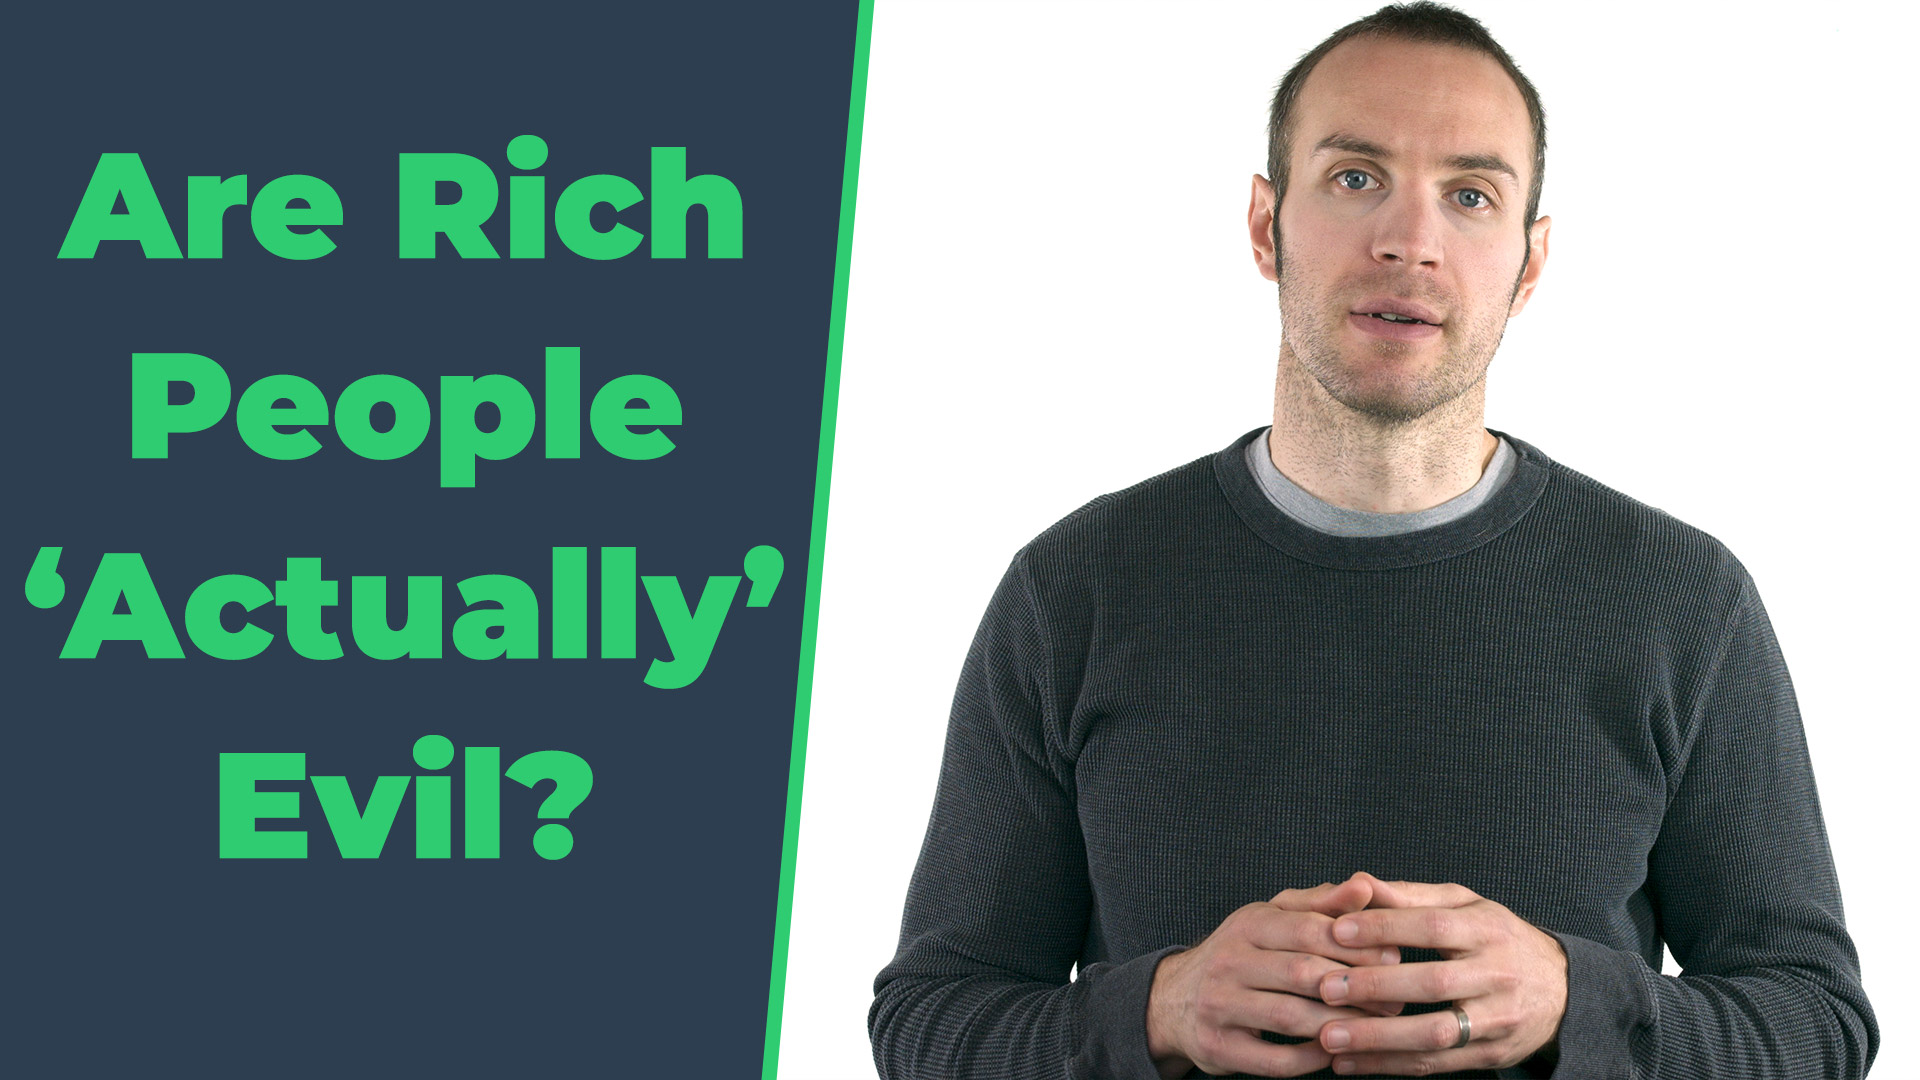 Are Rich People ‘Actually’ Evil?